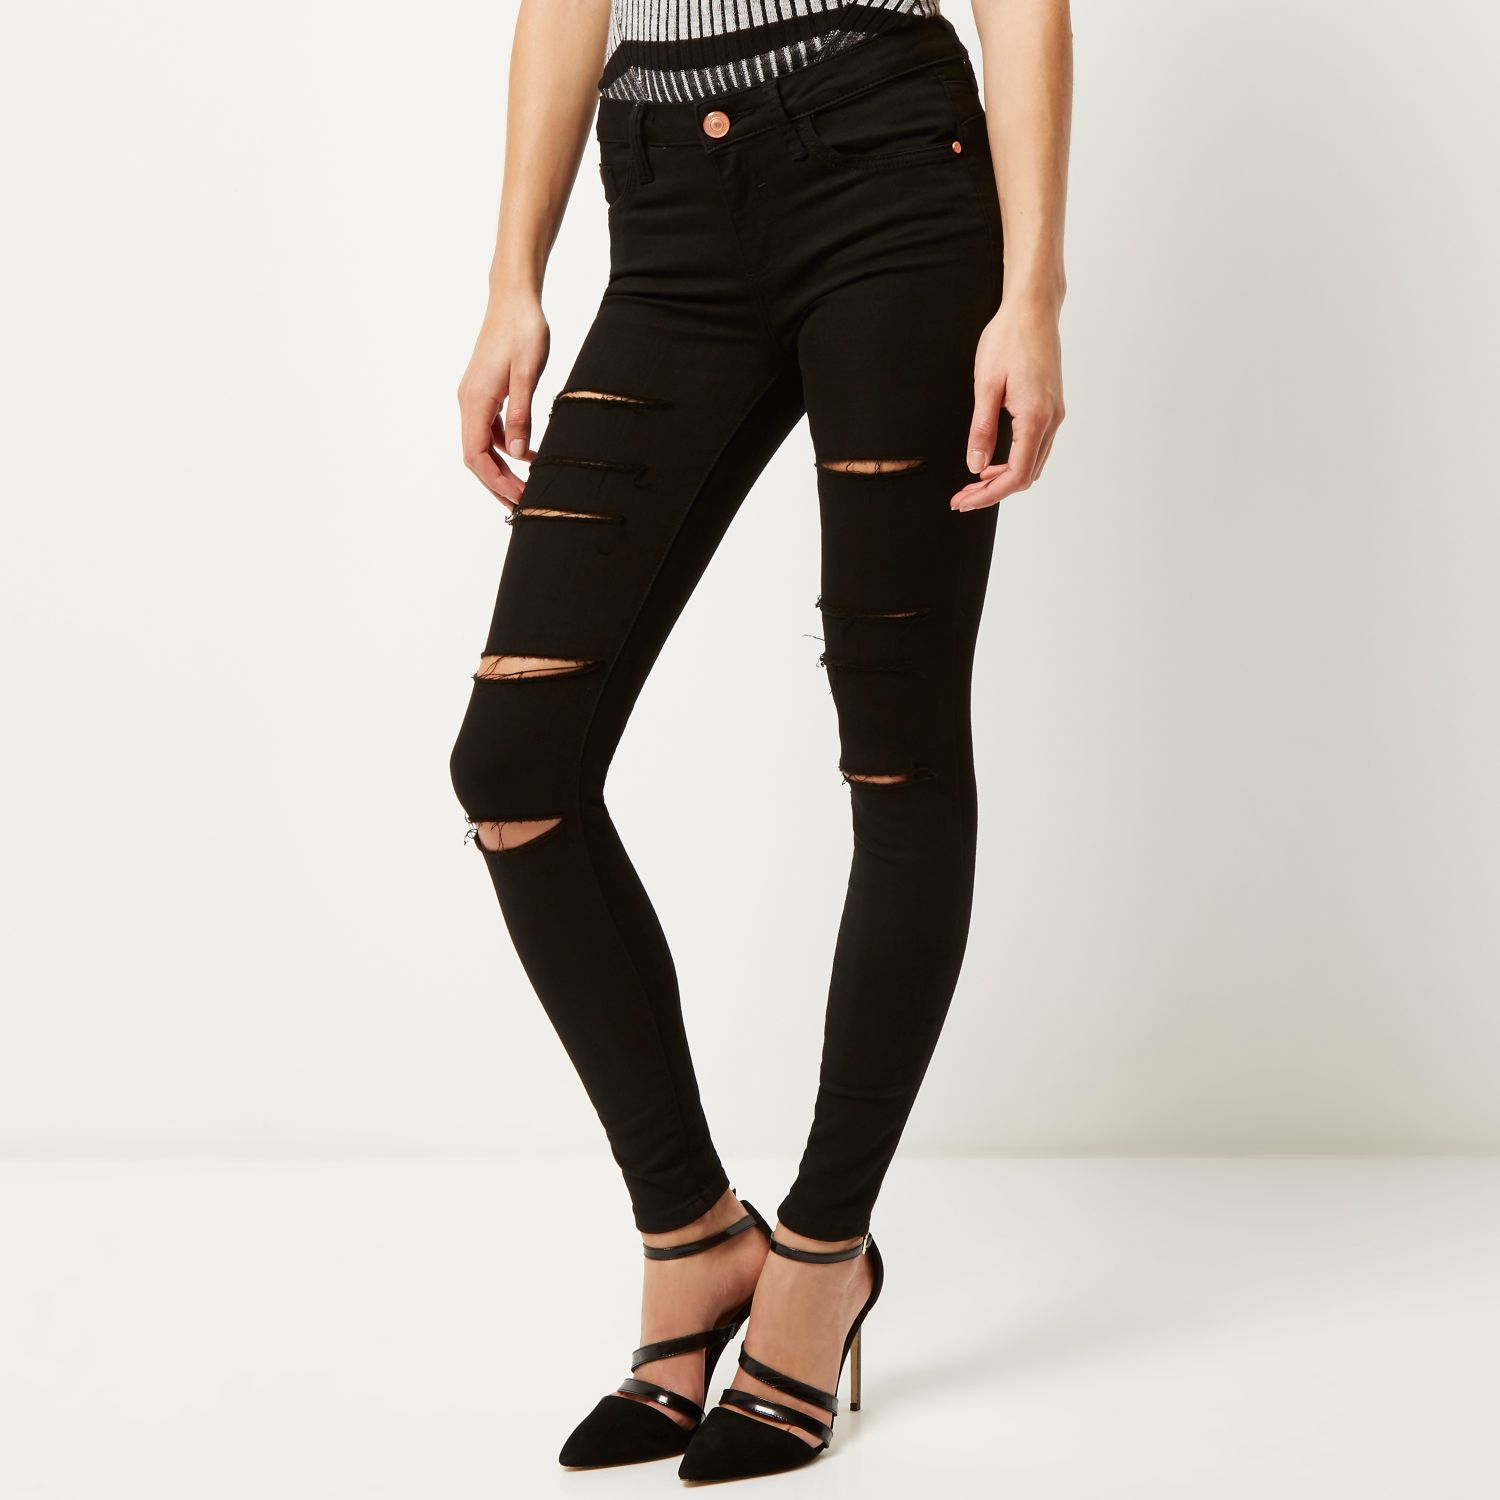 river island black ripped jeans